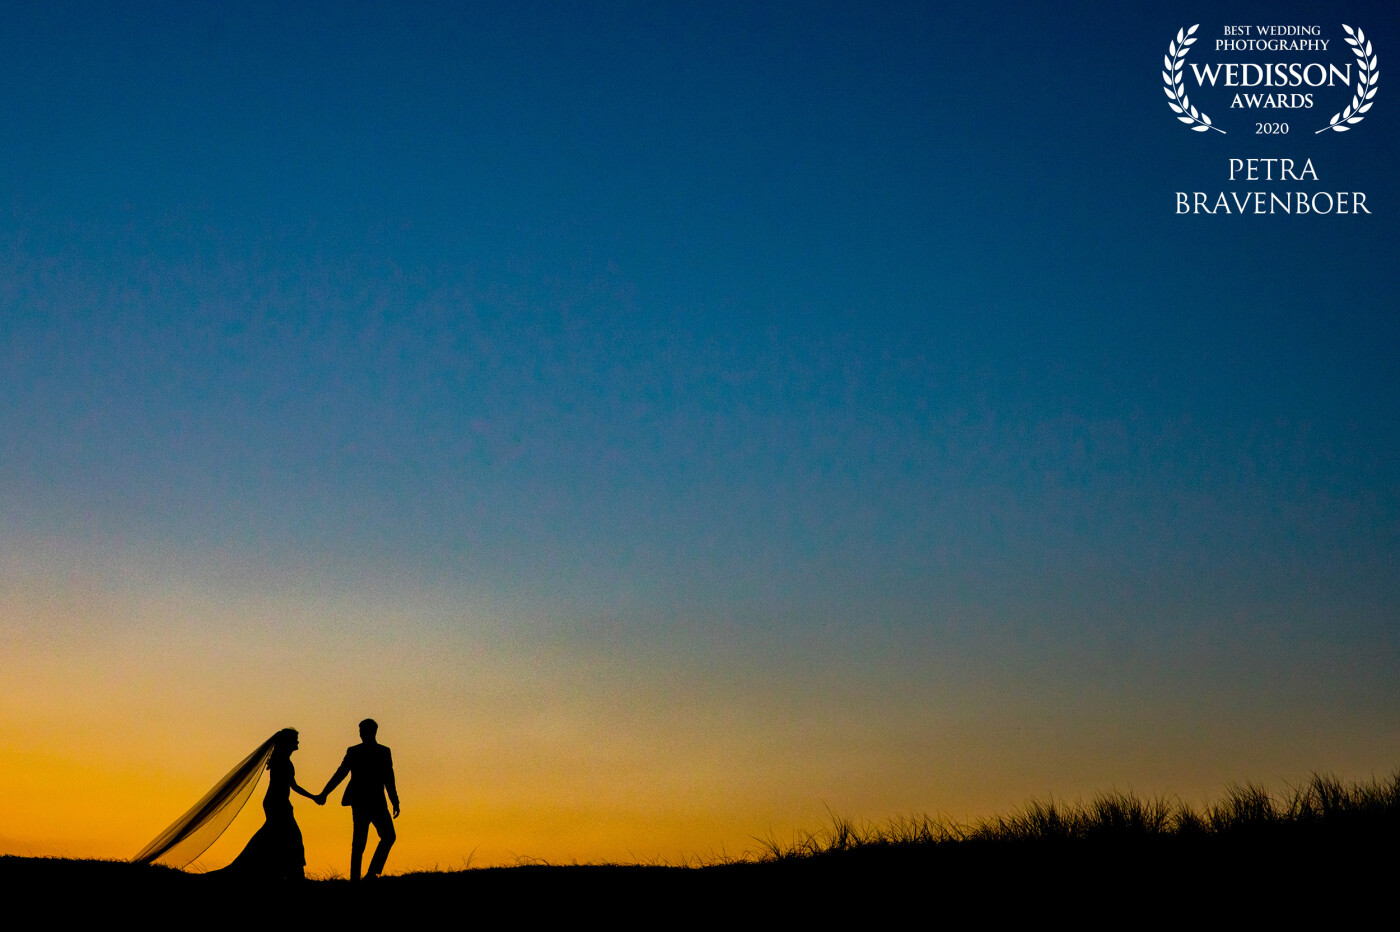 A beautiful September wedding at the beach of Noordwijk. Just after sunset - the party already started - kids were playing on top of the dunes. This wedding couple walked up the dune to the kids and this beautiful silhouette appeared. 